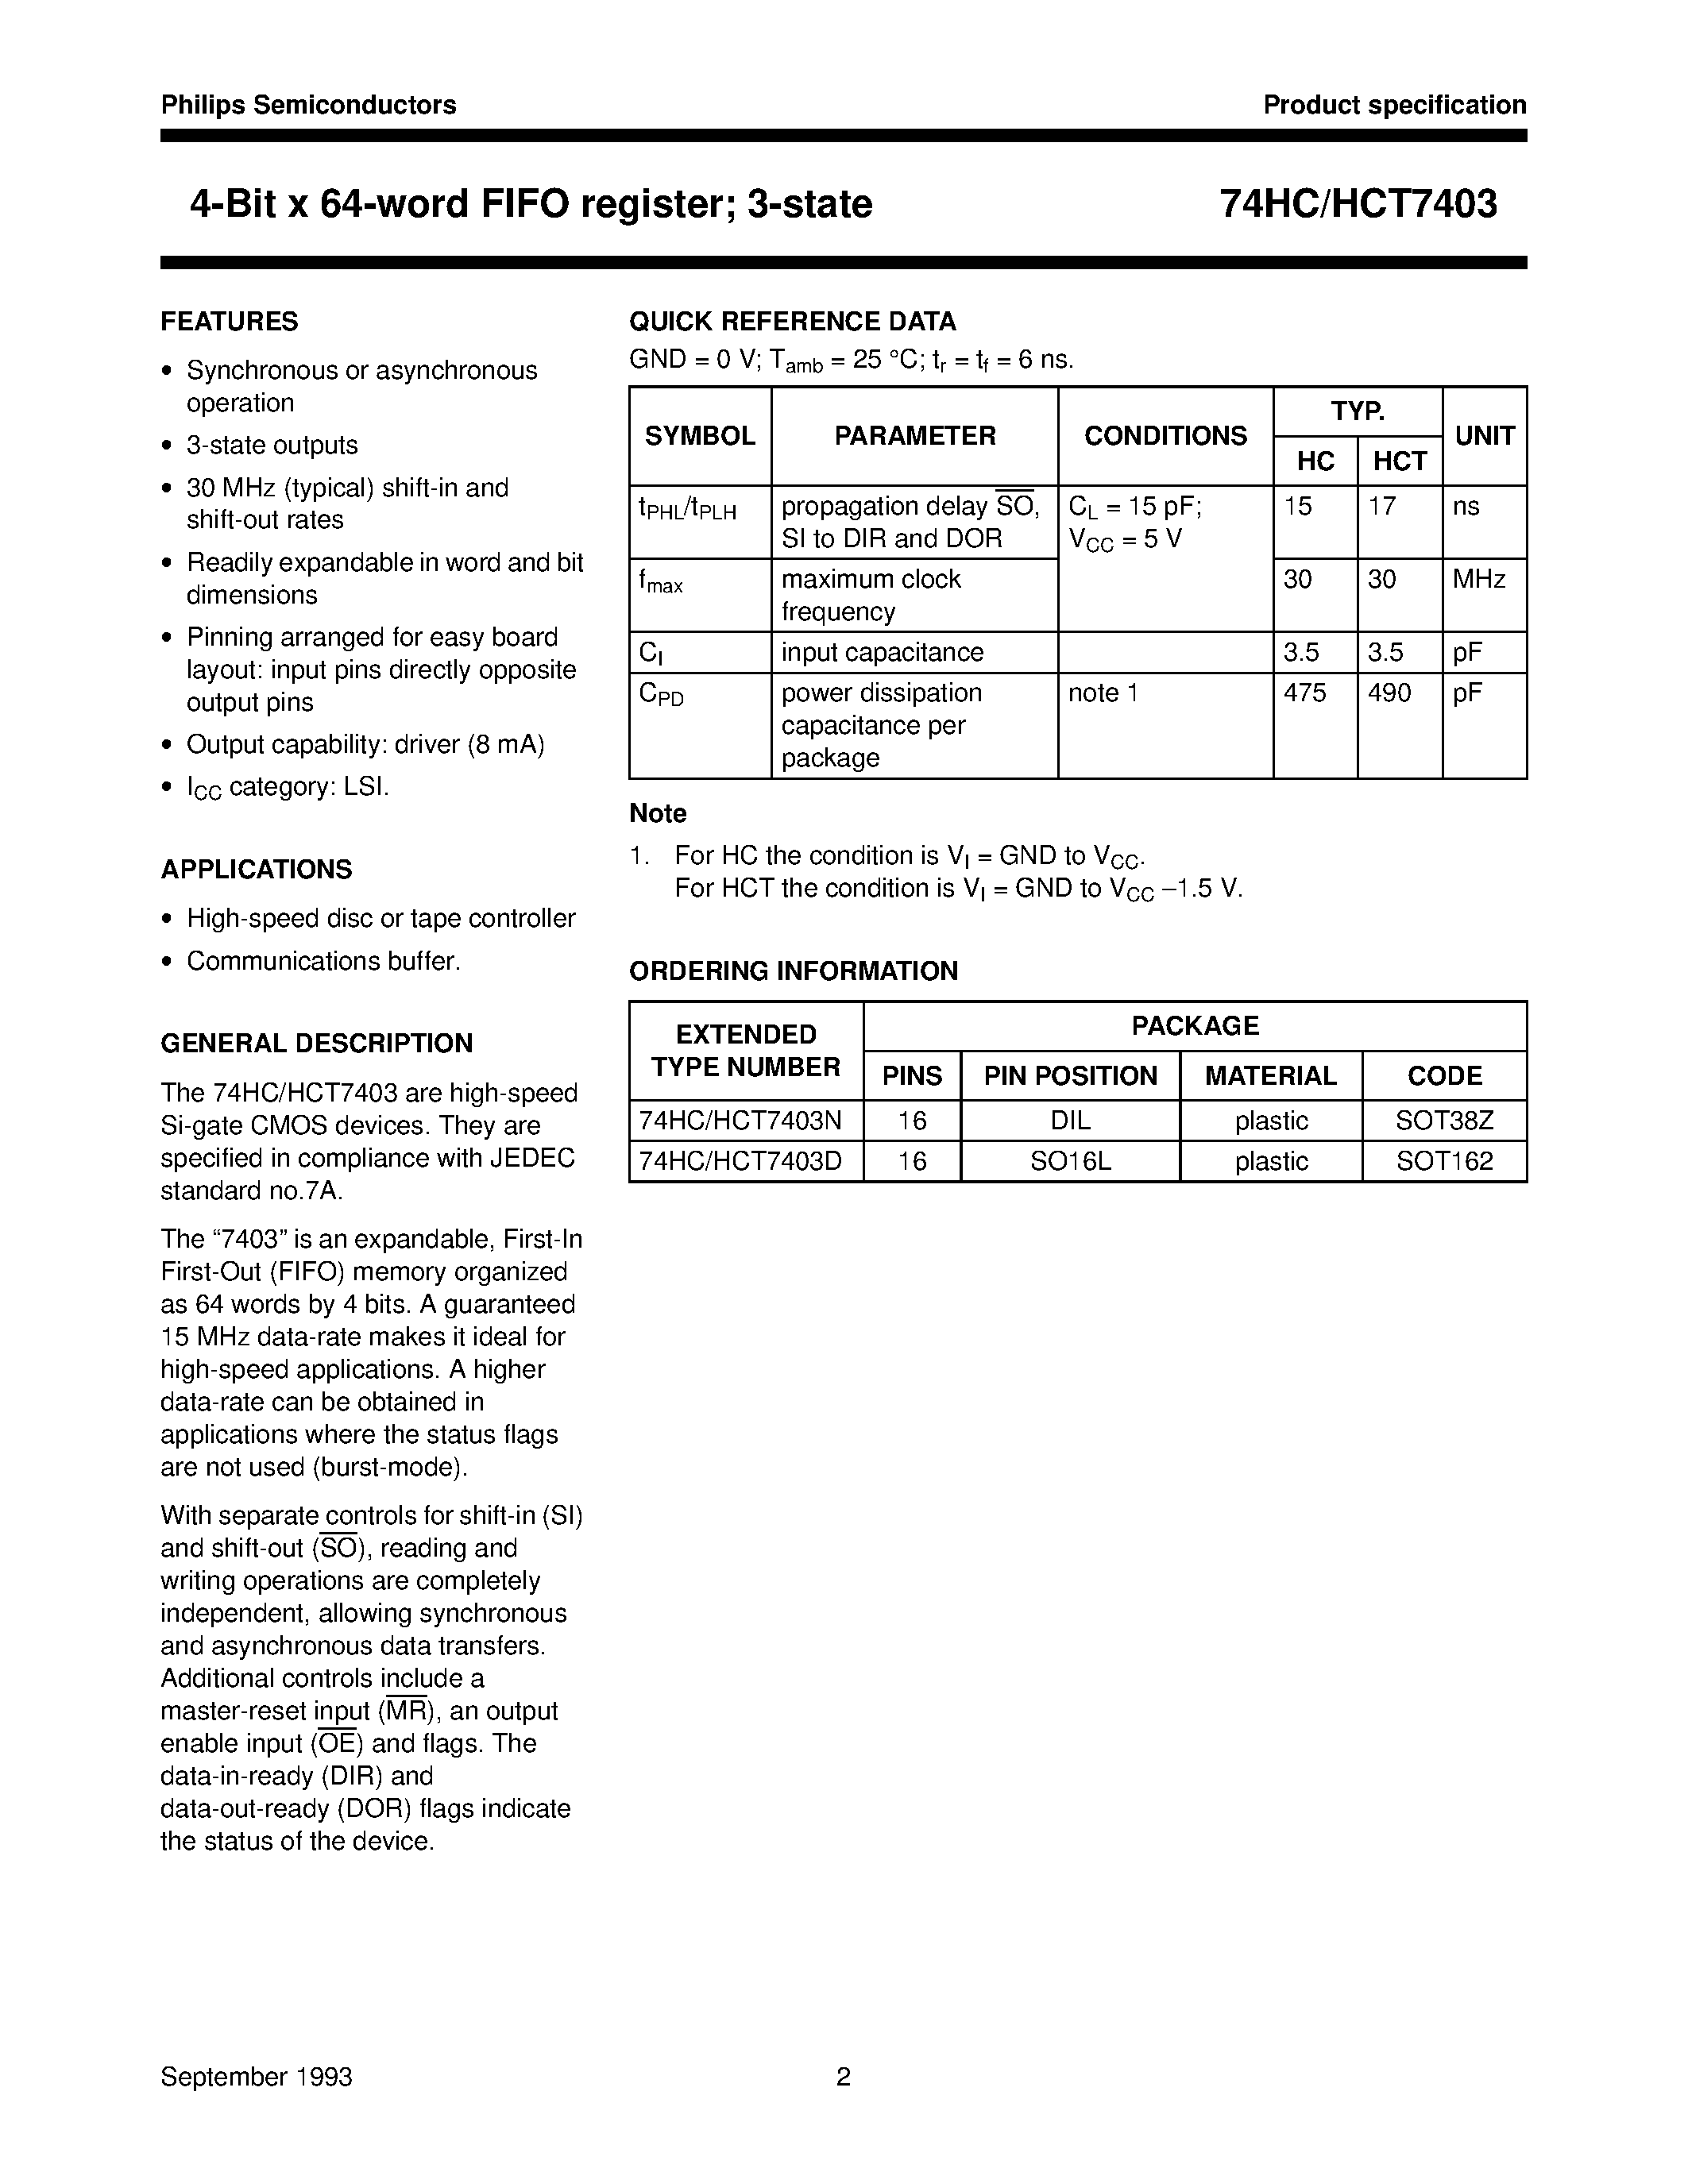 Datasheet 74HCT7403D - 4-Bit x 64-word FIFO register; 3-state page 2